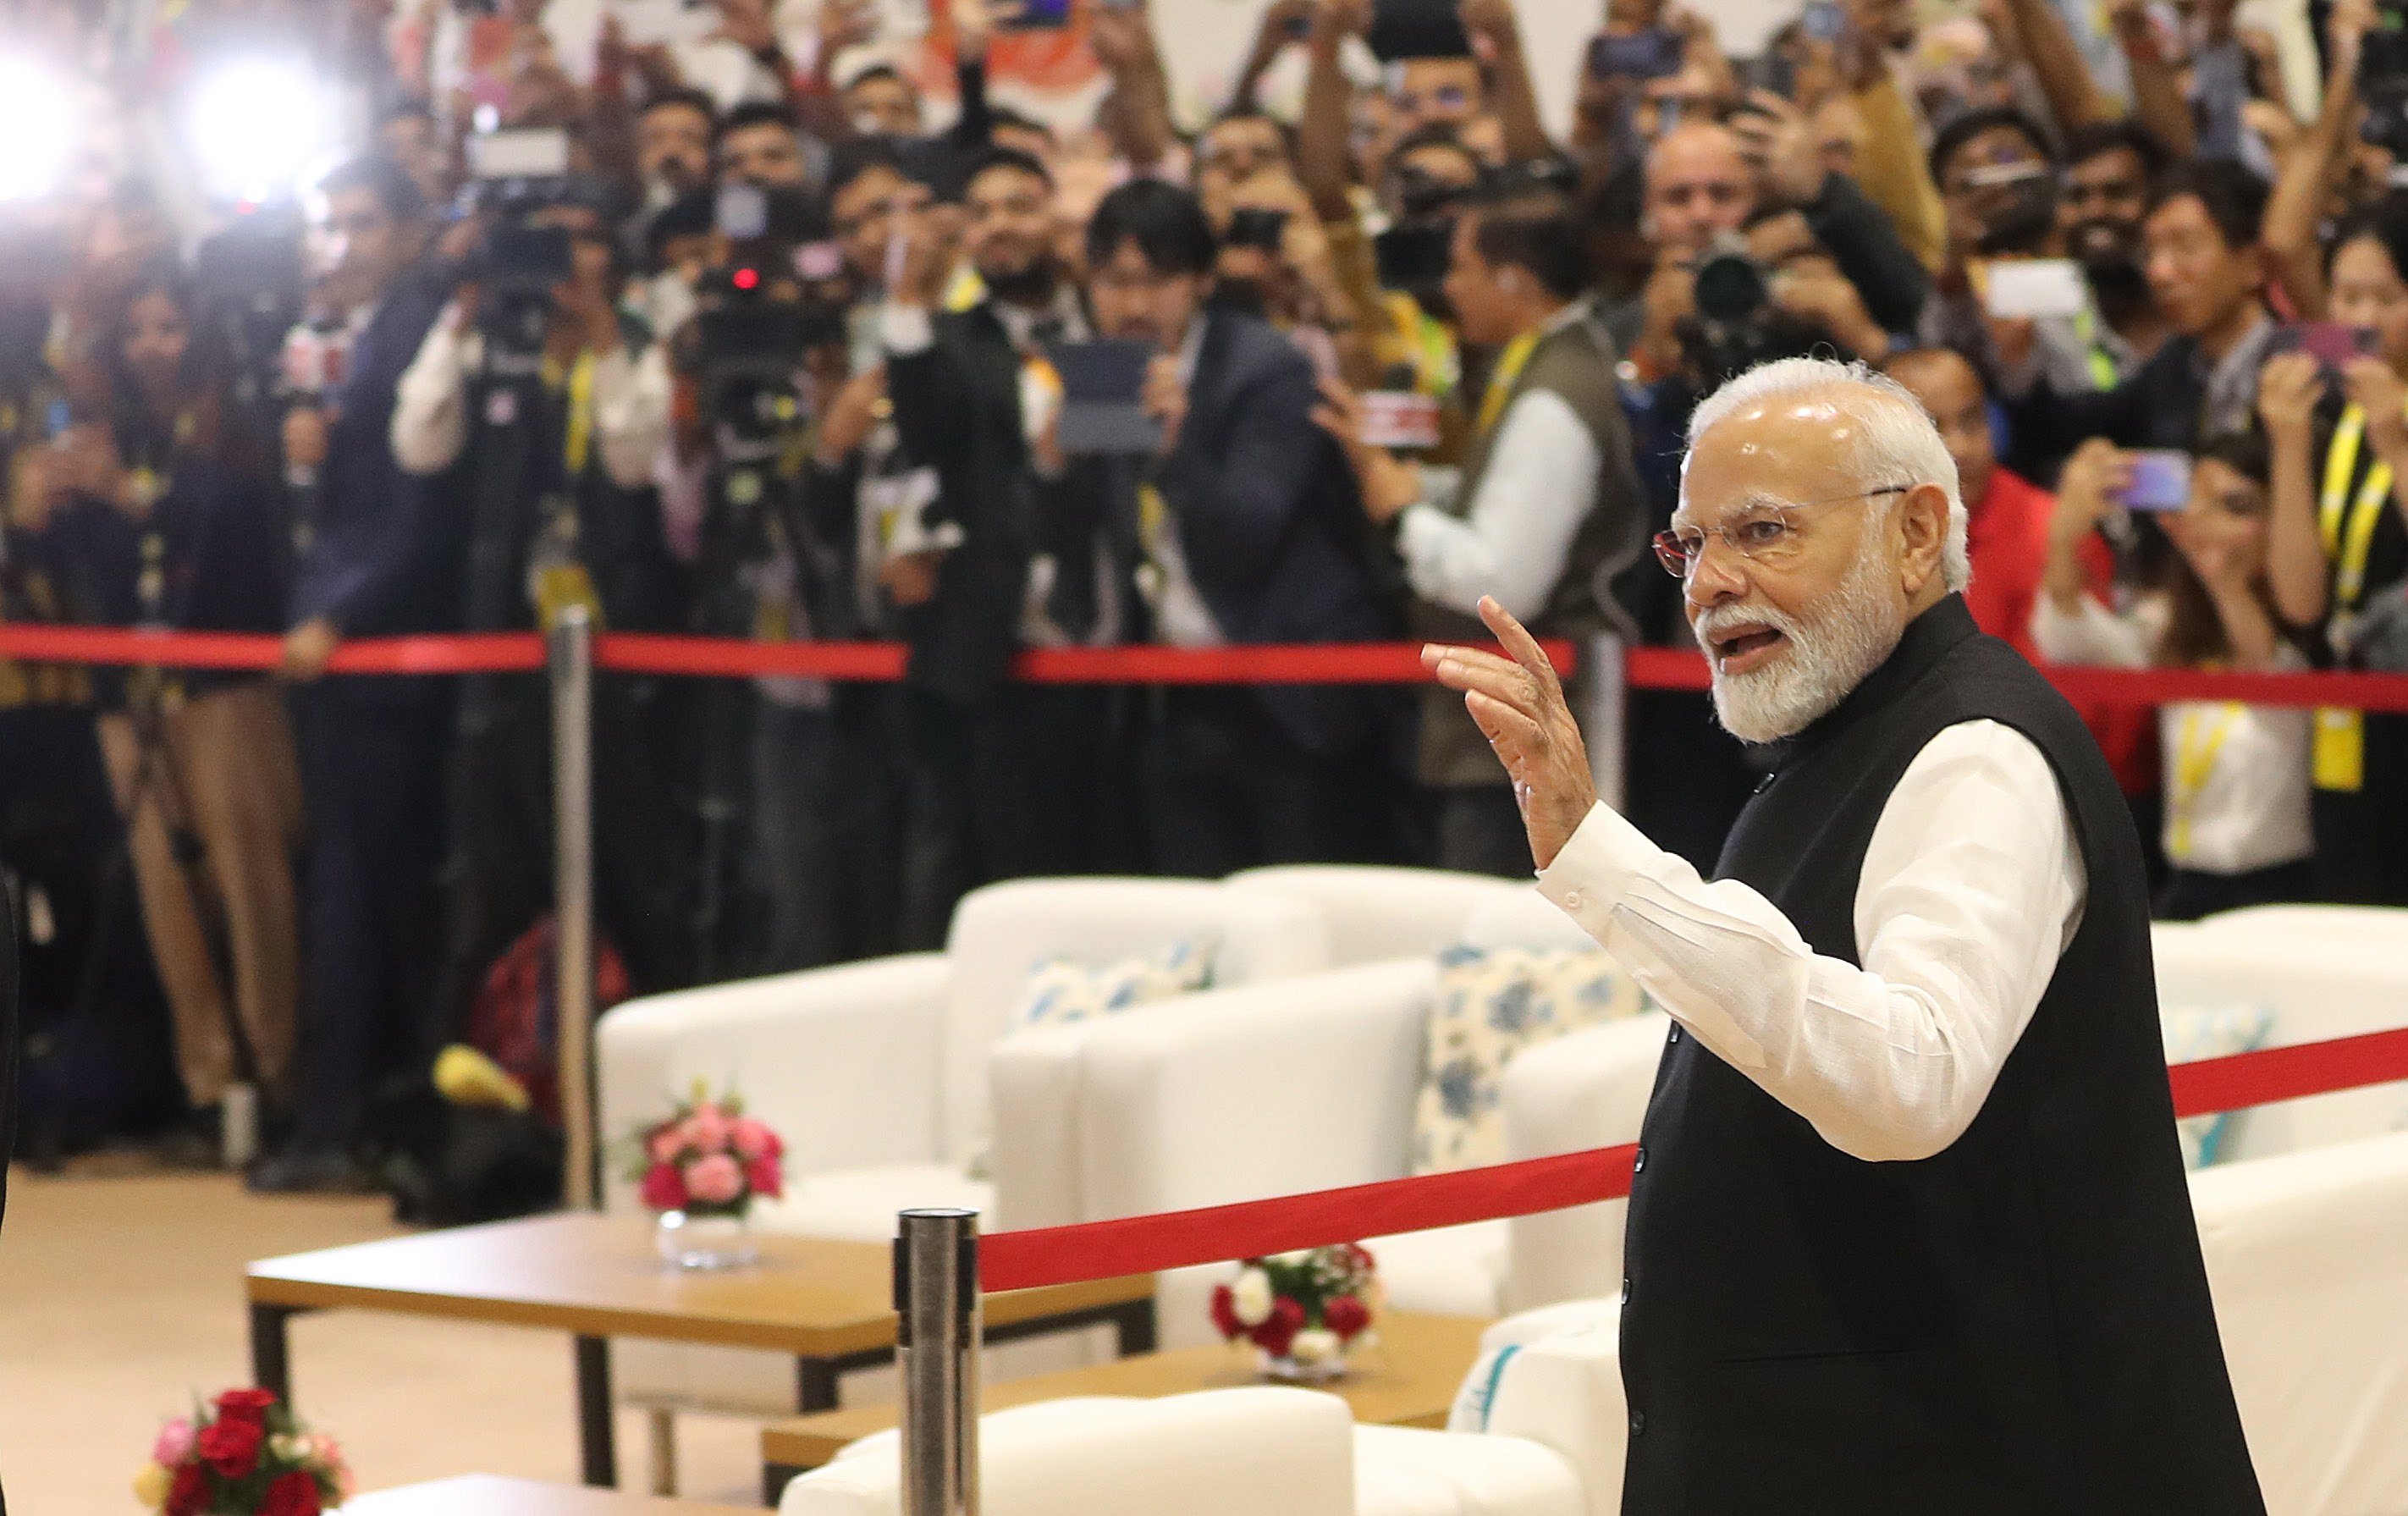 Indian Prime Minister Narendra Modi after the closing of G20 Summit in New Delhi in September. Modi was targeted in a deep fake video showing him at a festival that he did not attend. Photo: EPA-EFE